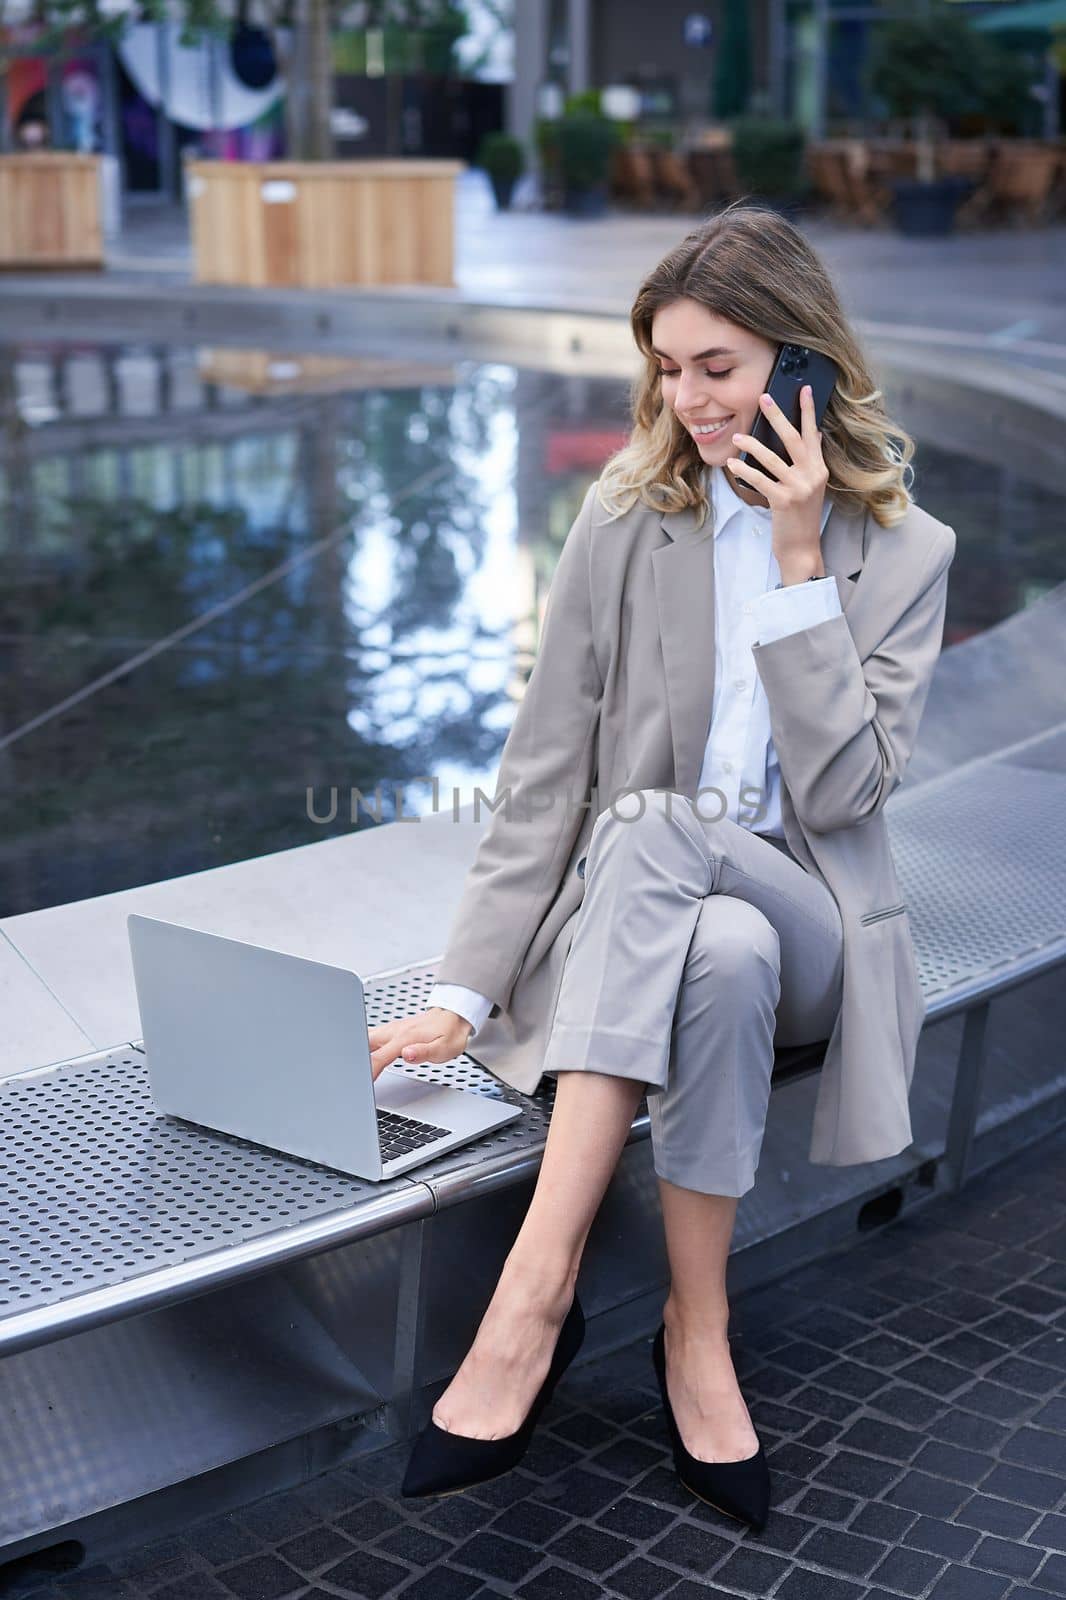 Vertical shot of corporate woman sitting outdoors with laptop, talking on mobile phone, working ouside office building while waiting for someone.